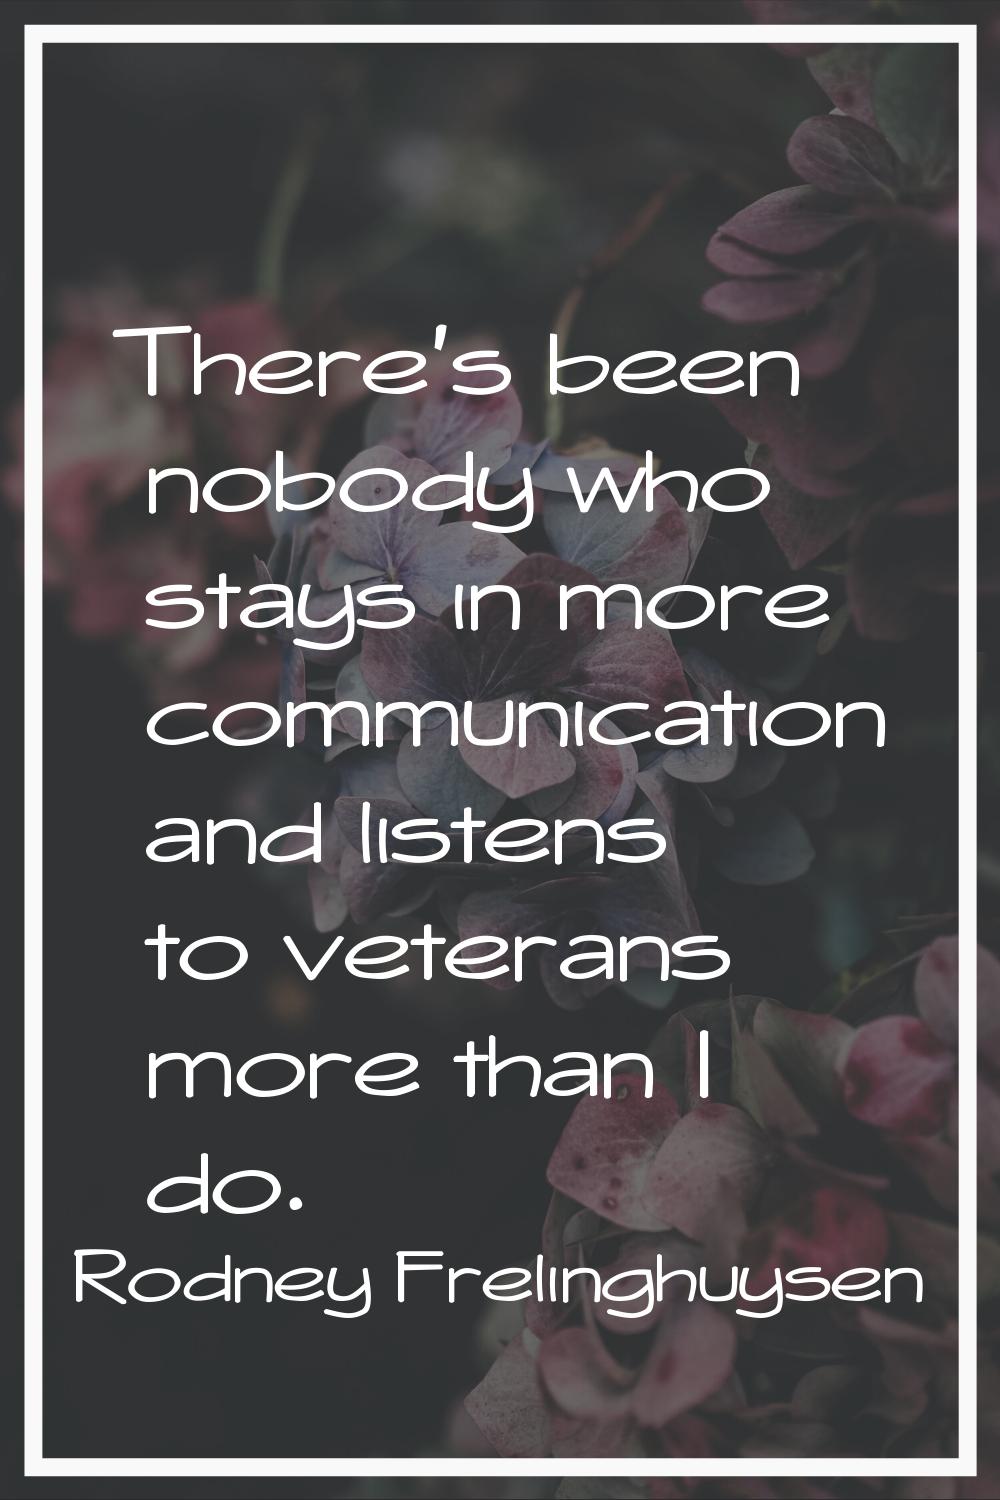 There's been nobody who stays in more communication and listens to veterans more than I do.